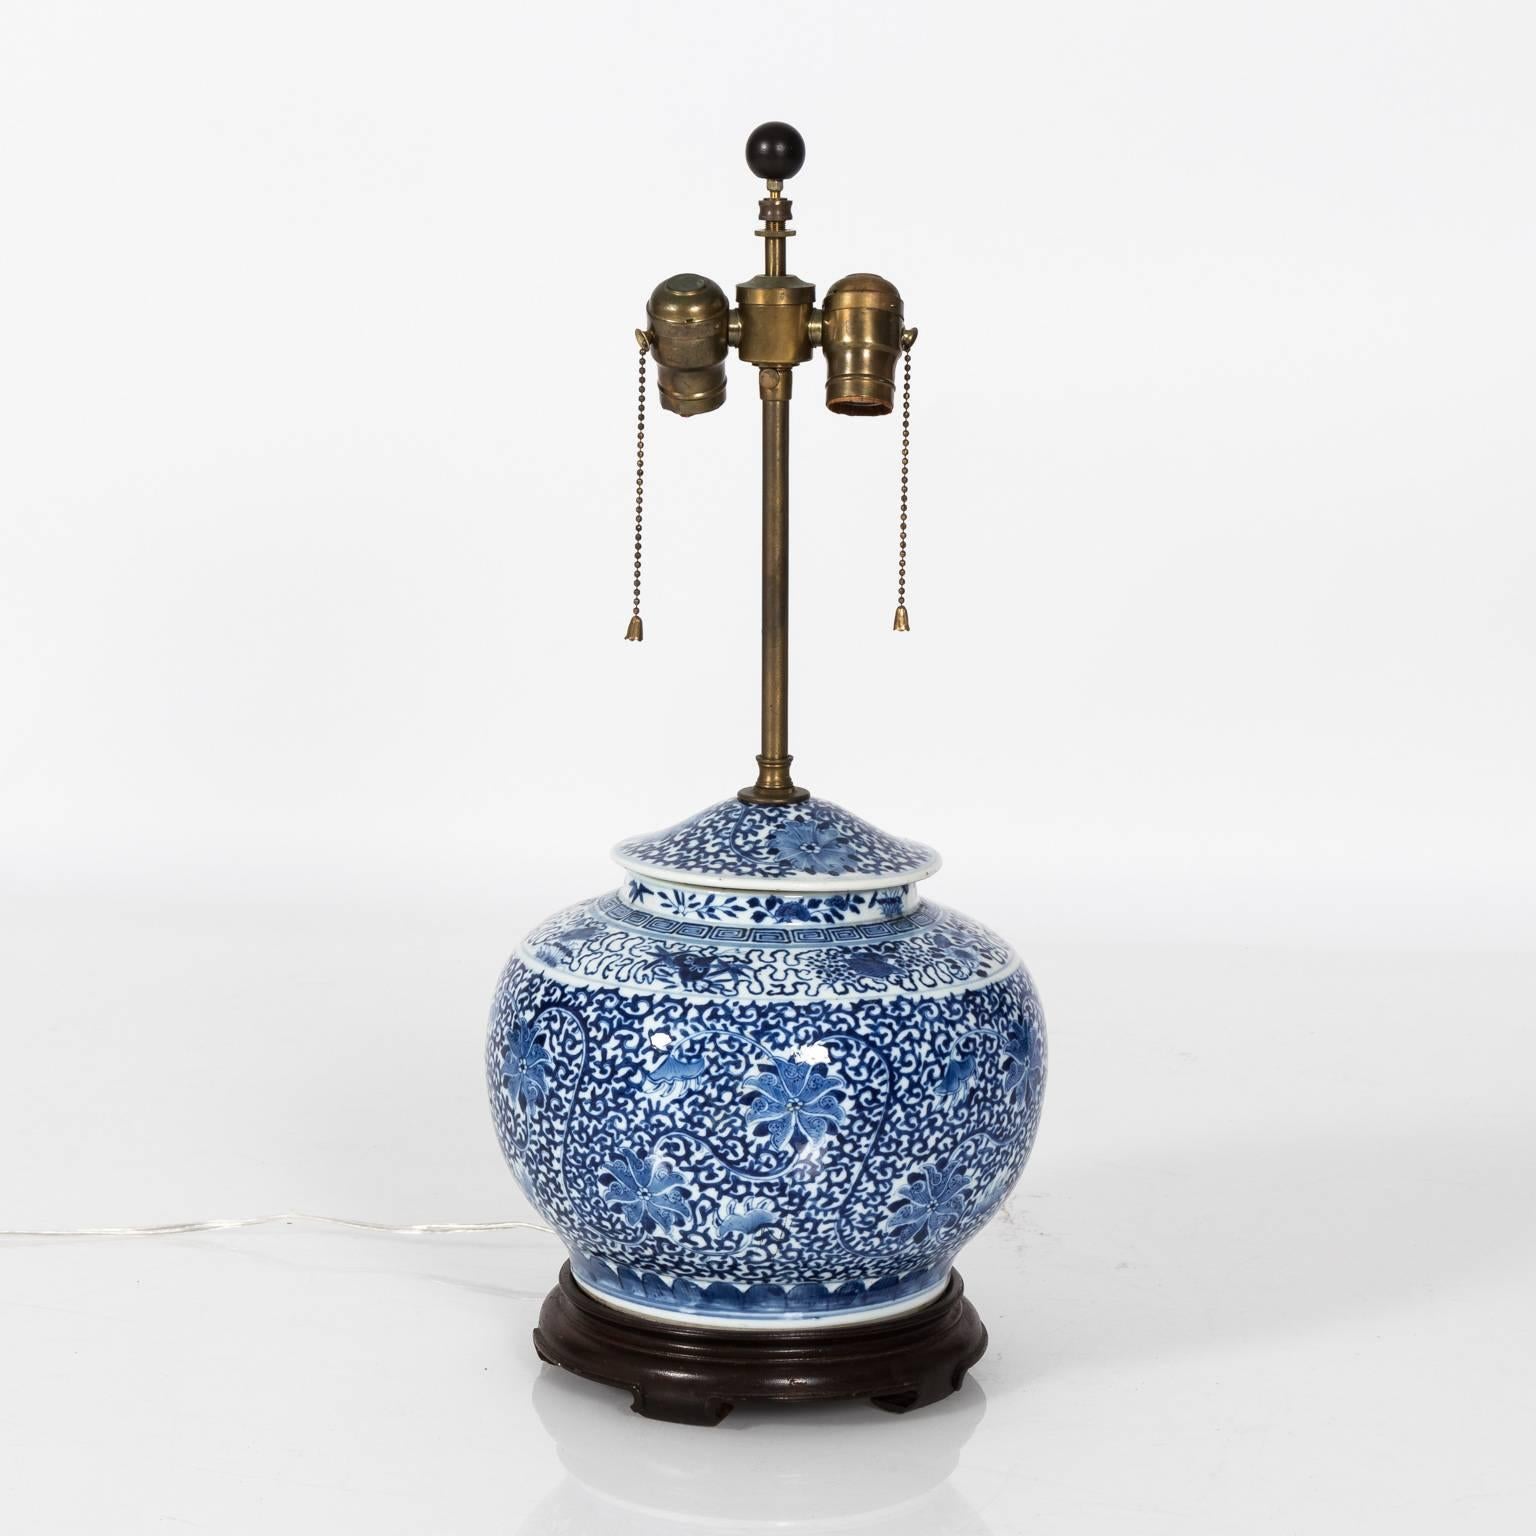 Table lamp made from Chinese blue white ginger jar, the jar and lid are very finely hand-painted in flower and vine pattern. One of the best you can find during that period. Great condition with no chips or cracks.